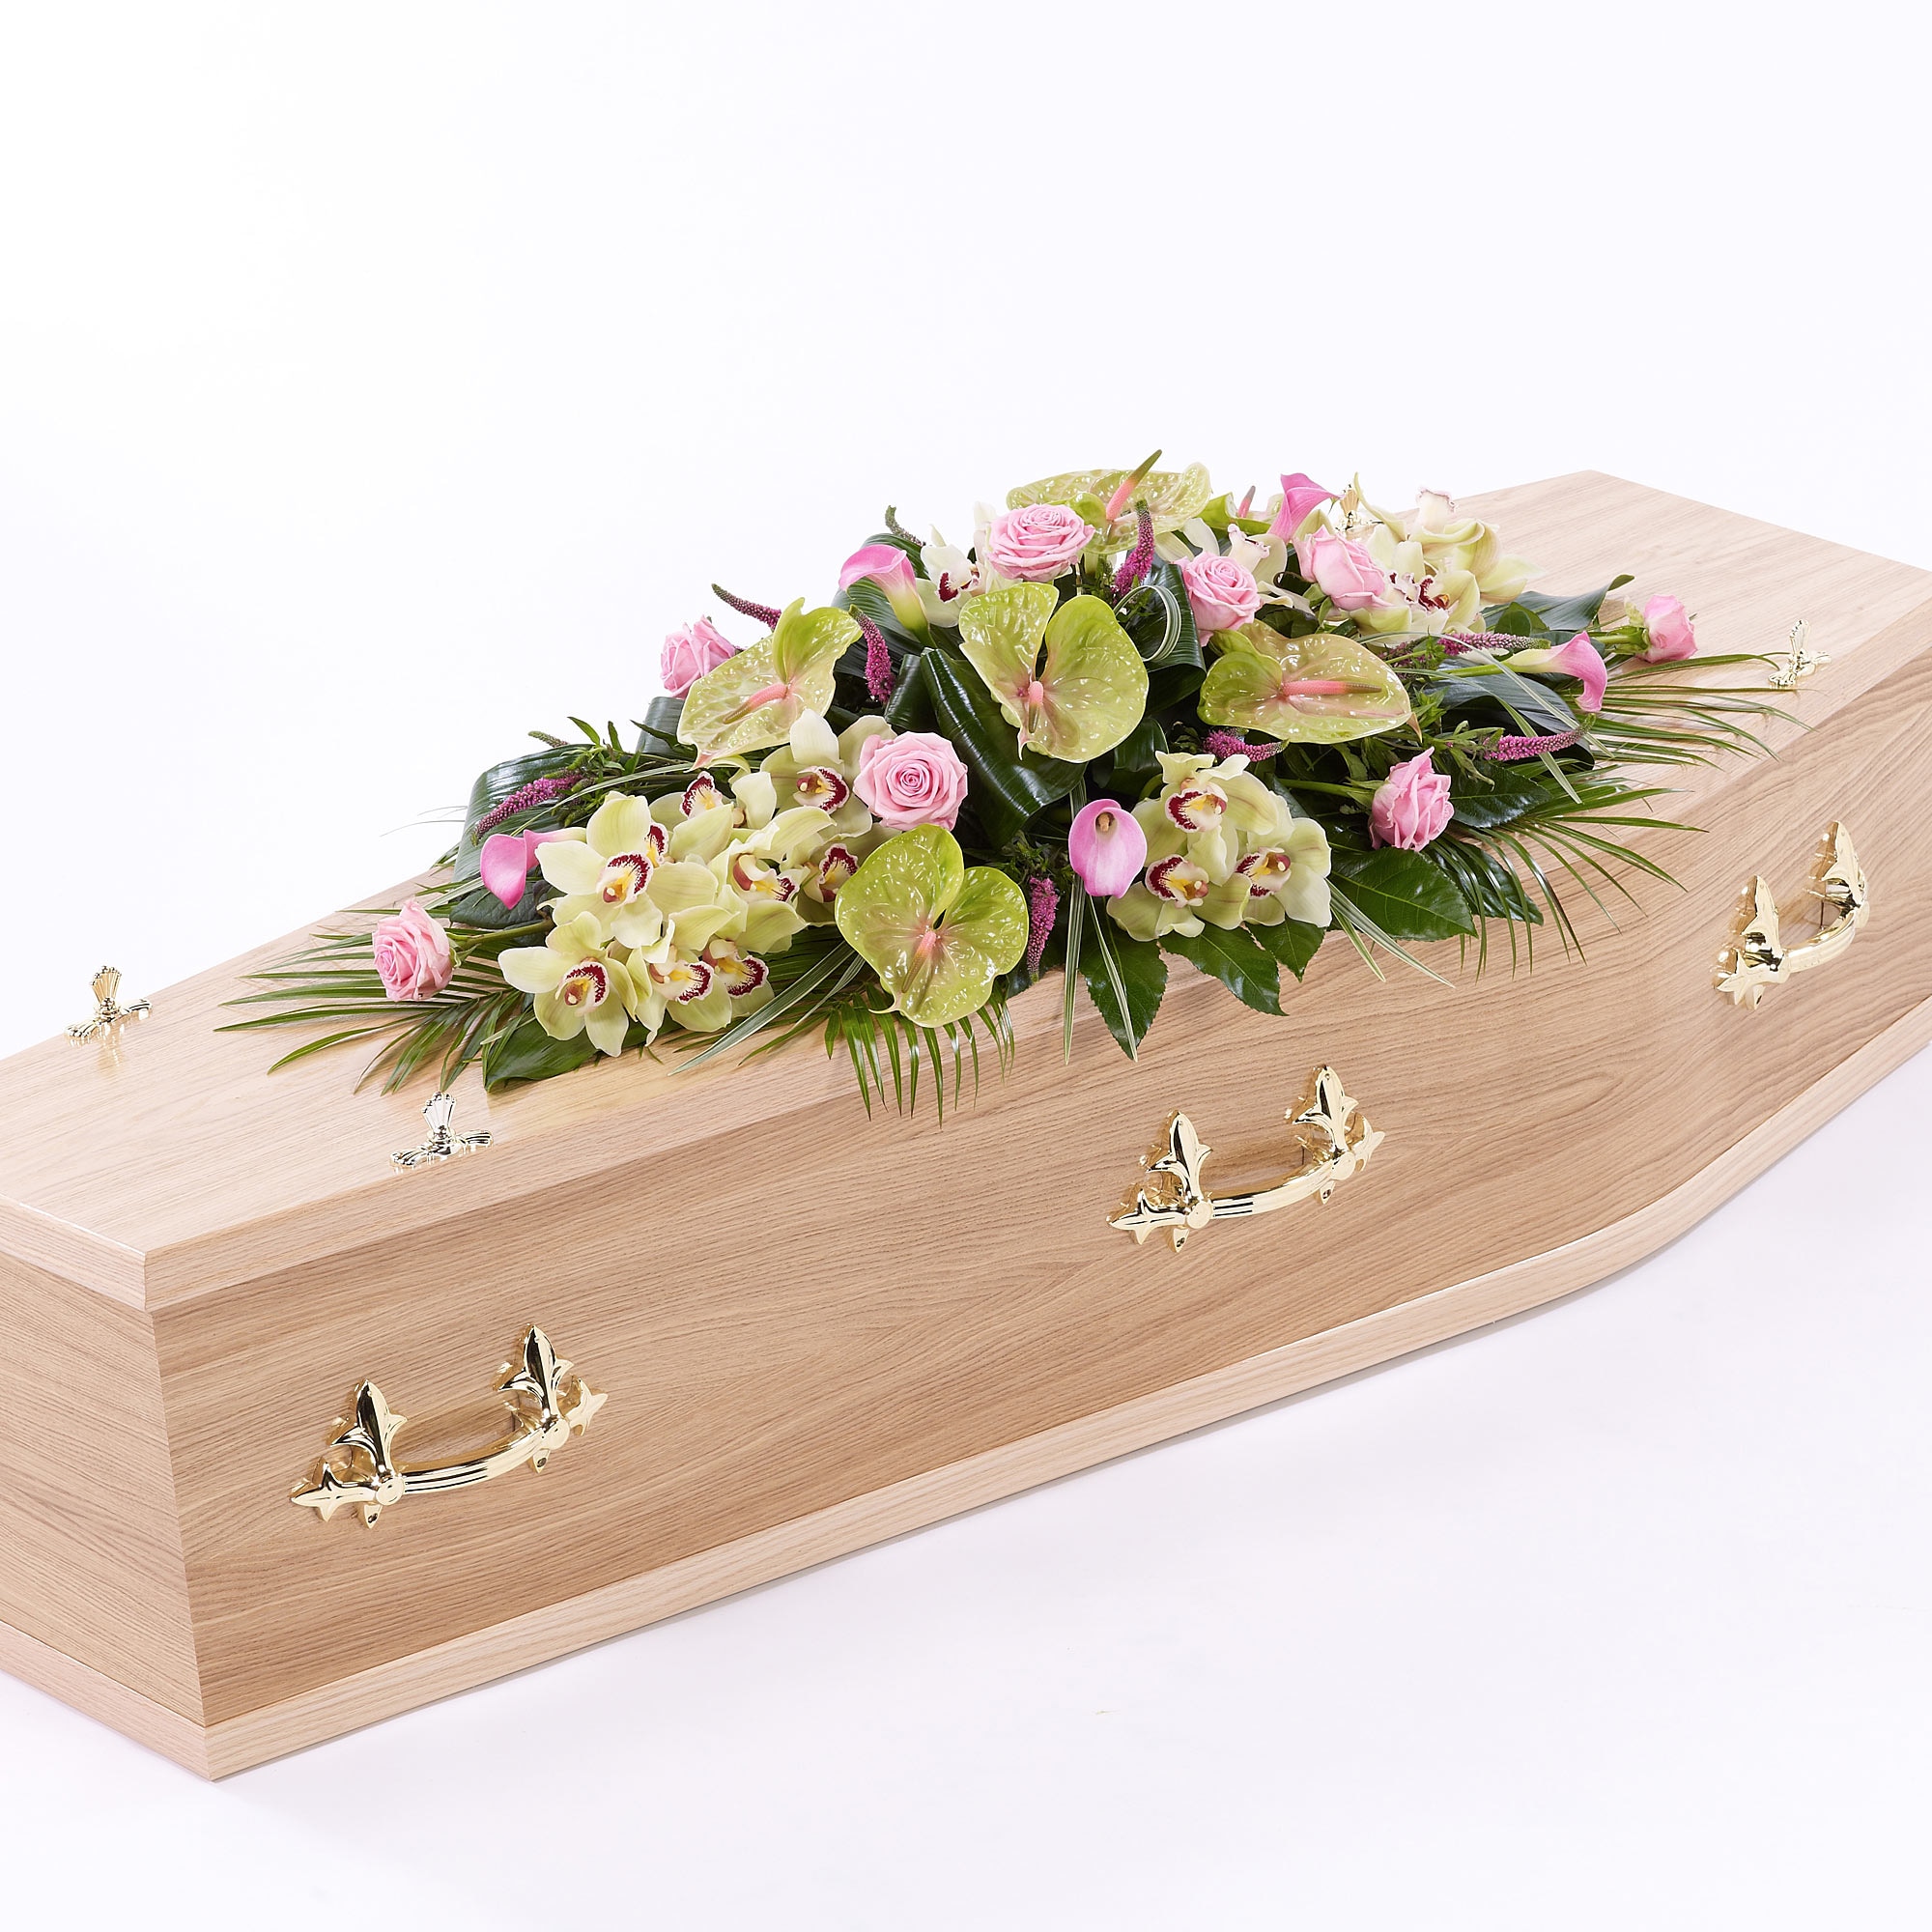 Rose, Orchid and Calla Lily Casket spray Funeral Casket Spray Flowers